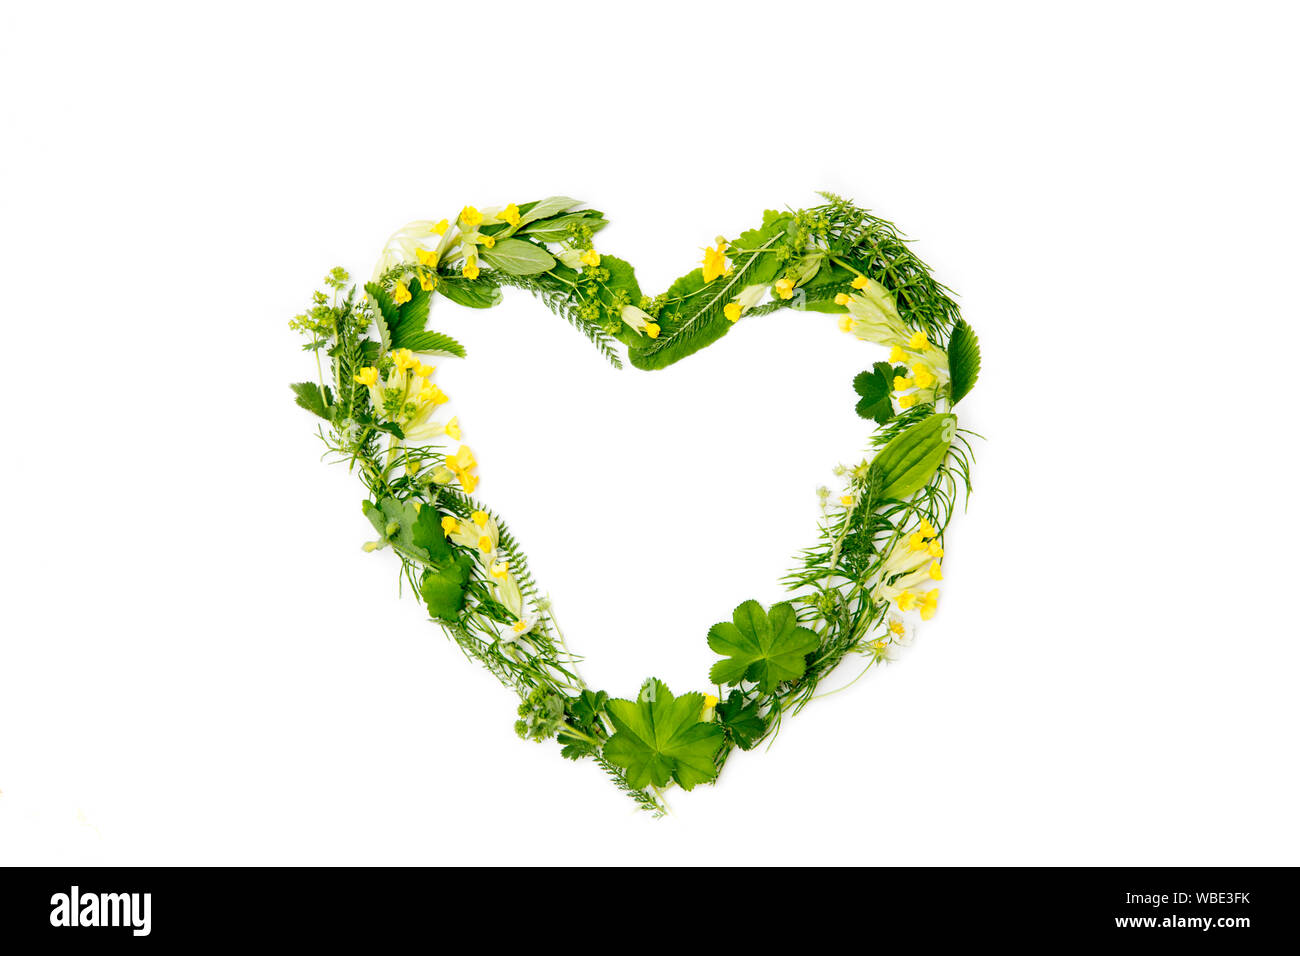 Love heart made out of different real fresh herbal medicinal plants (Lady's mantle, Primula veris, Equisetum arvense, Achillea) flat lay  view, isolat Stock Photo